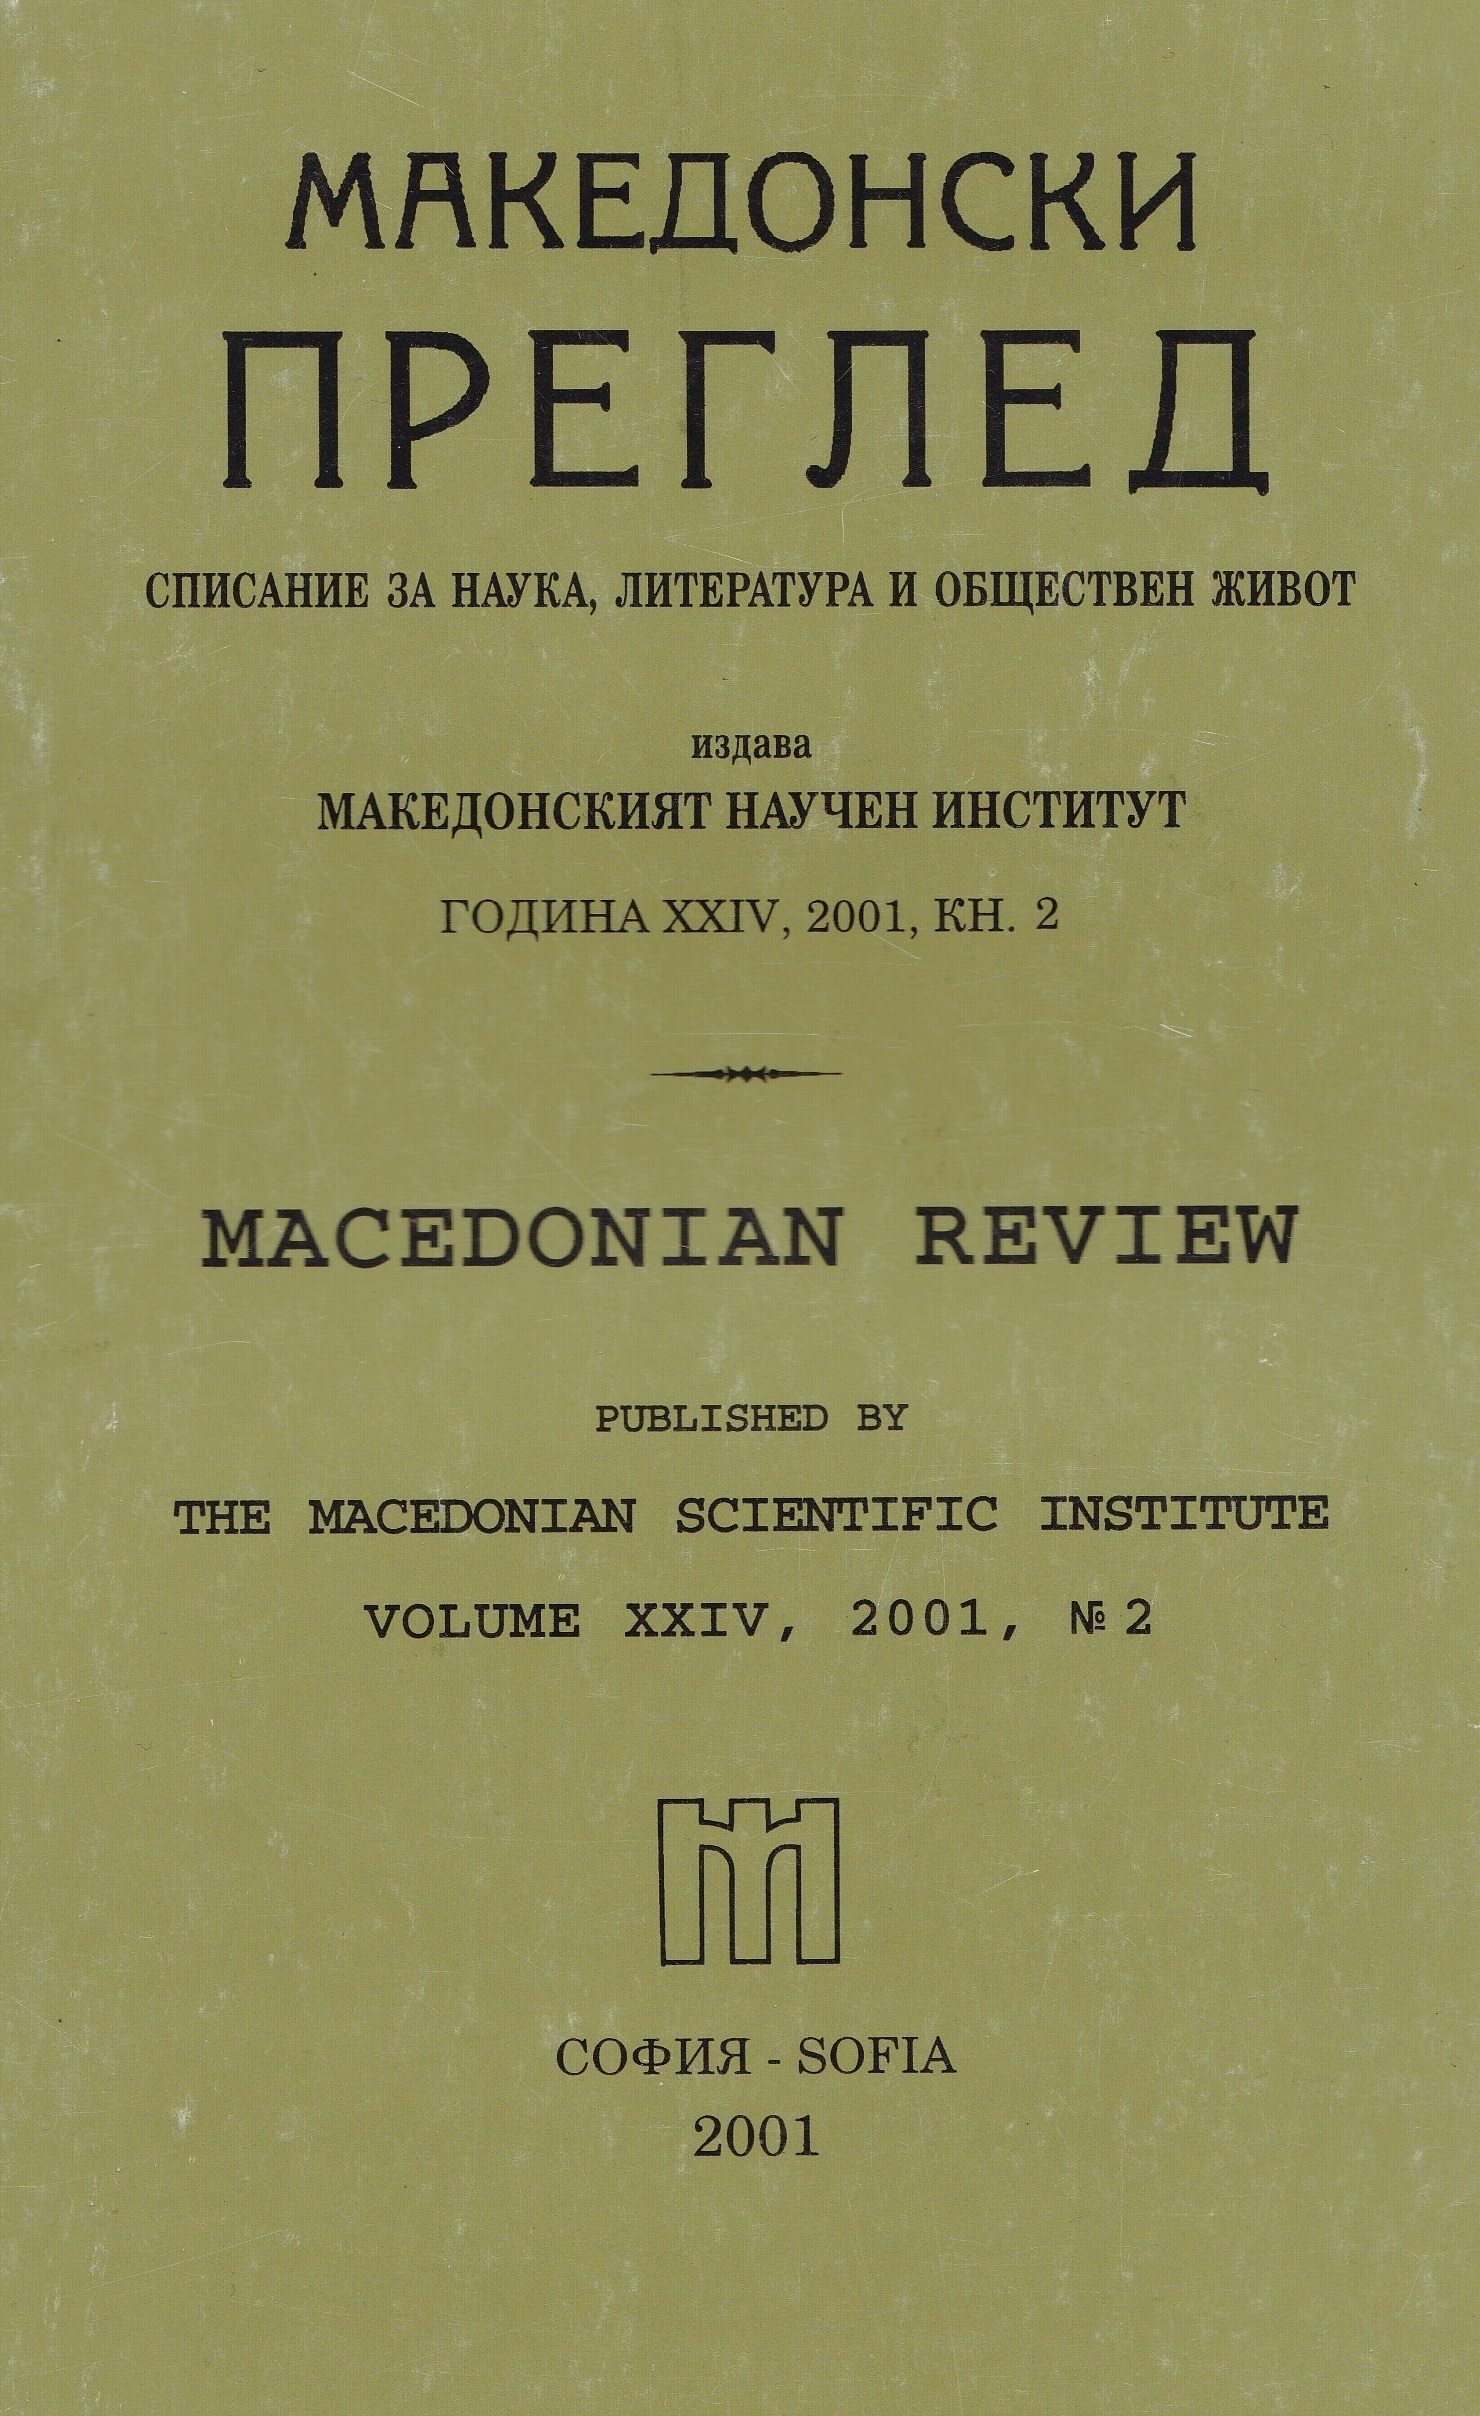 An Attempt to Write Macedonia’s Ethnography. Ethnology of the Macedonians. Skopje, 1996, pp. 340. Cover Image